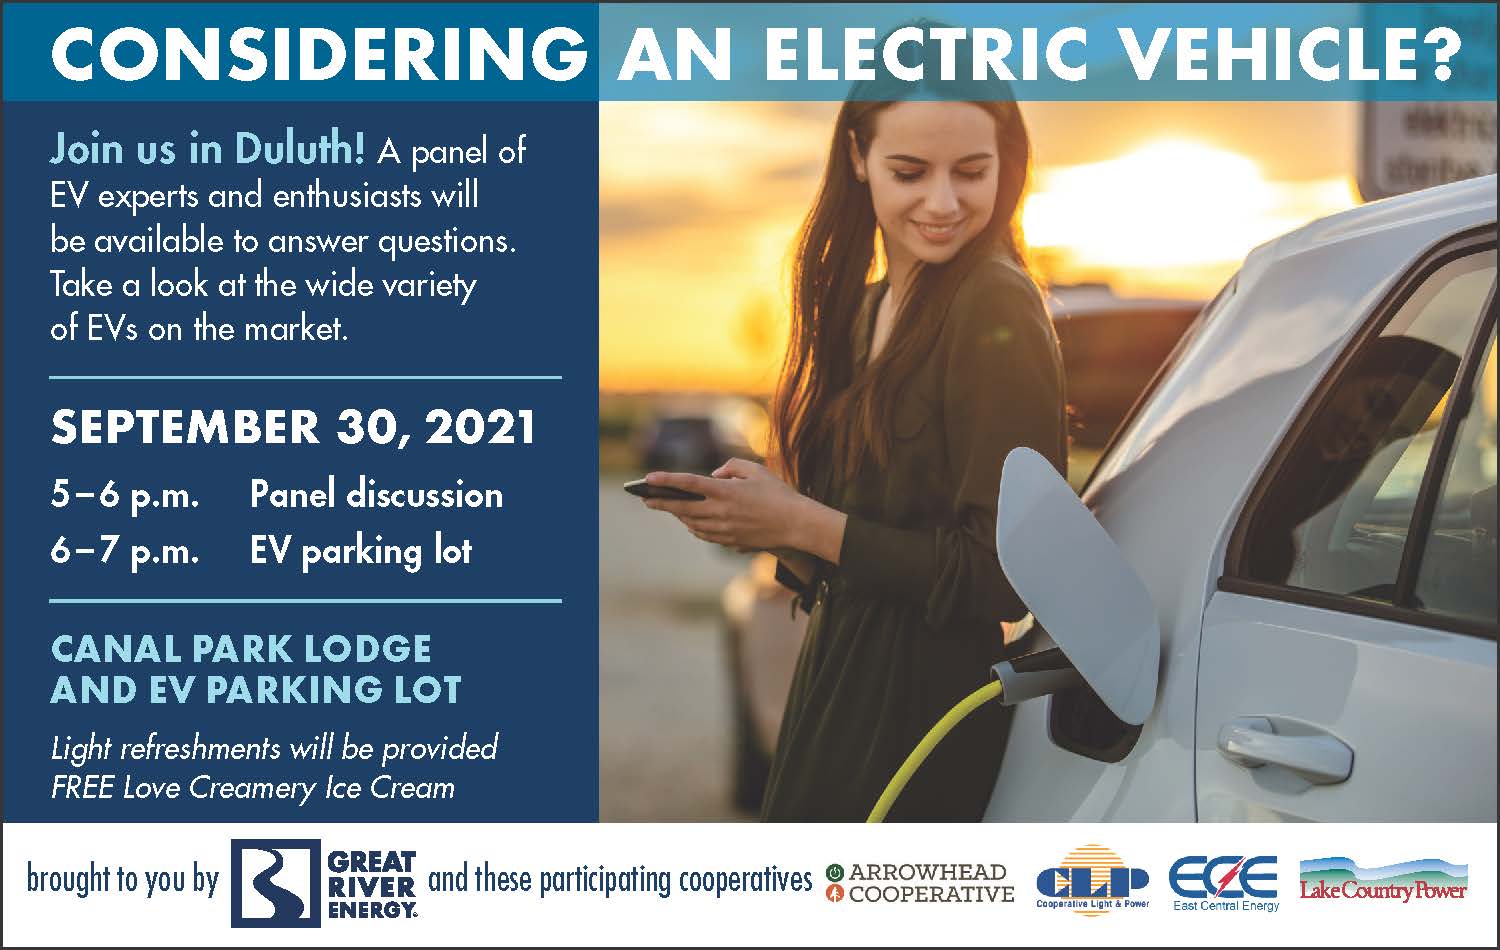 Advertisement for 2021 Duluth EV Show and Tell Event.